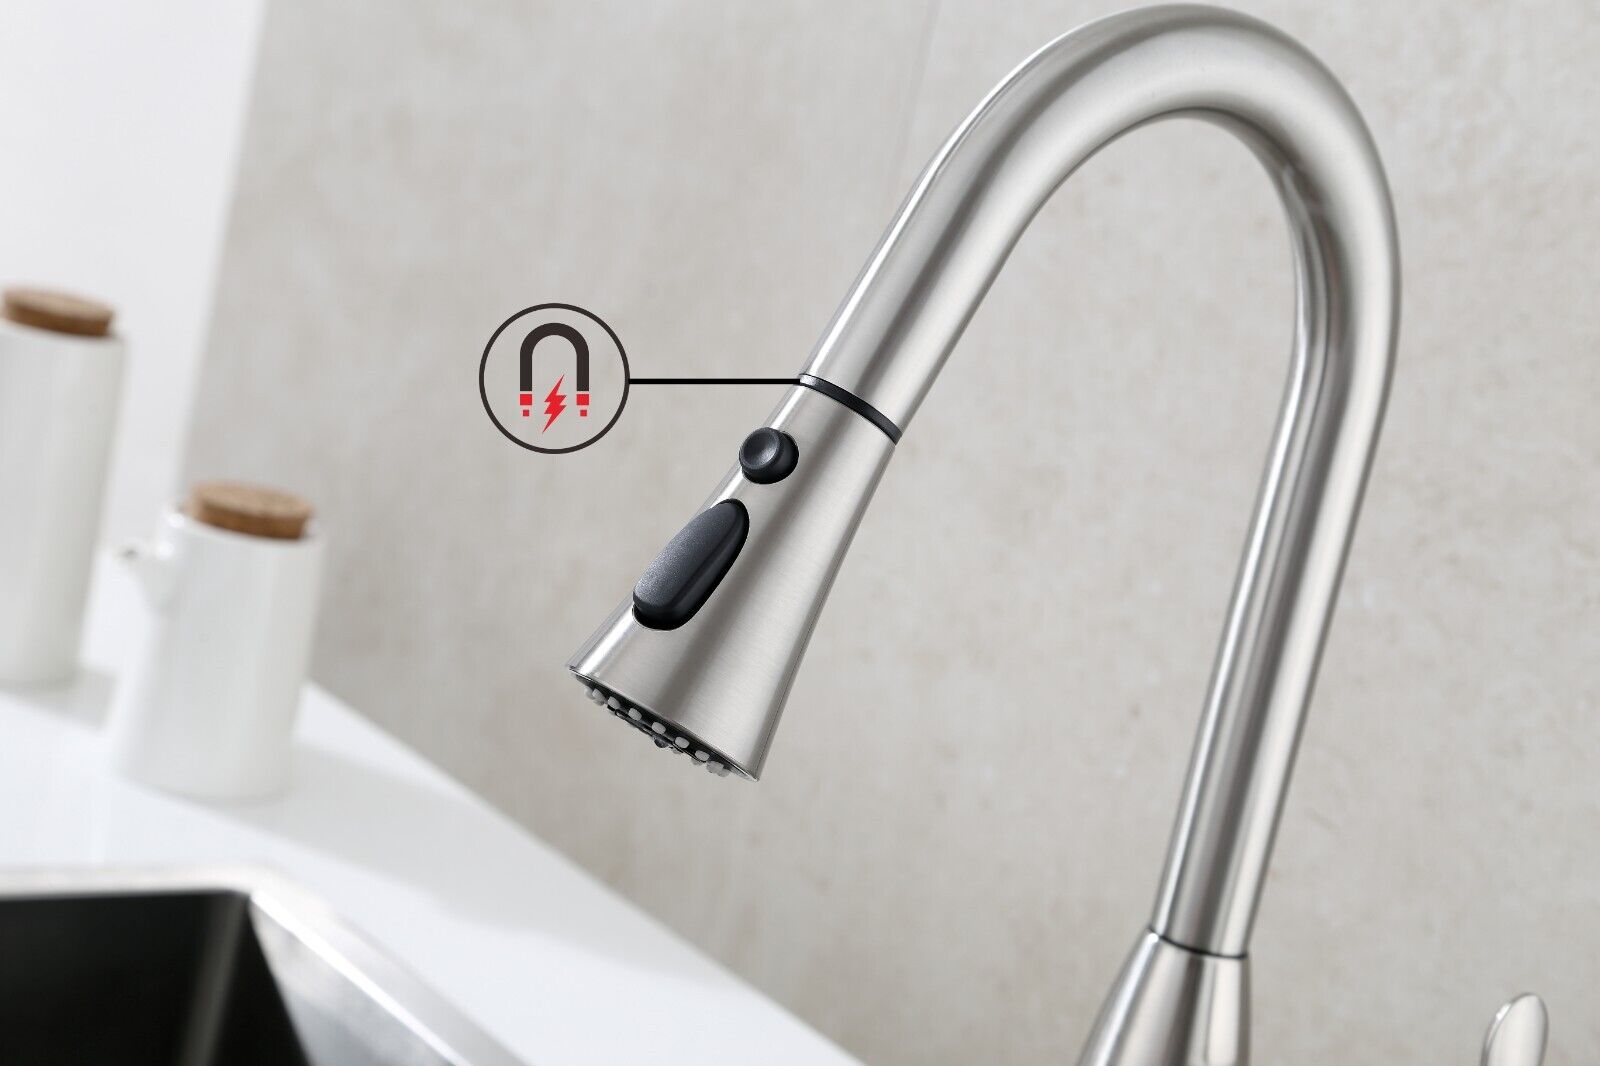 Frigidaire Alexis Single Handle Pull Down Kitchen Sink Faucet in Brushed Nickel with 3 Function Spray Head 23-Frigidaire-Alexis-BN - image 3 of 9